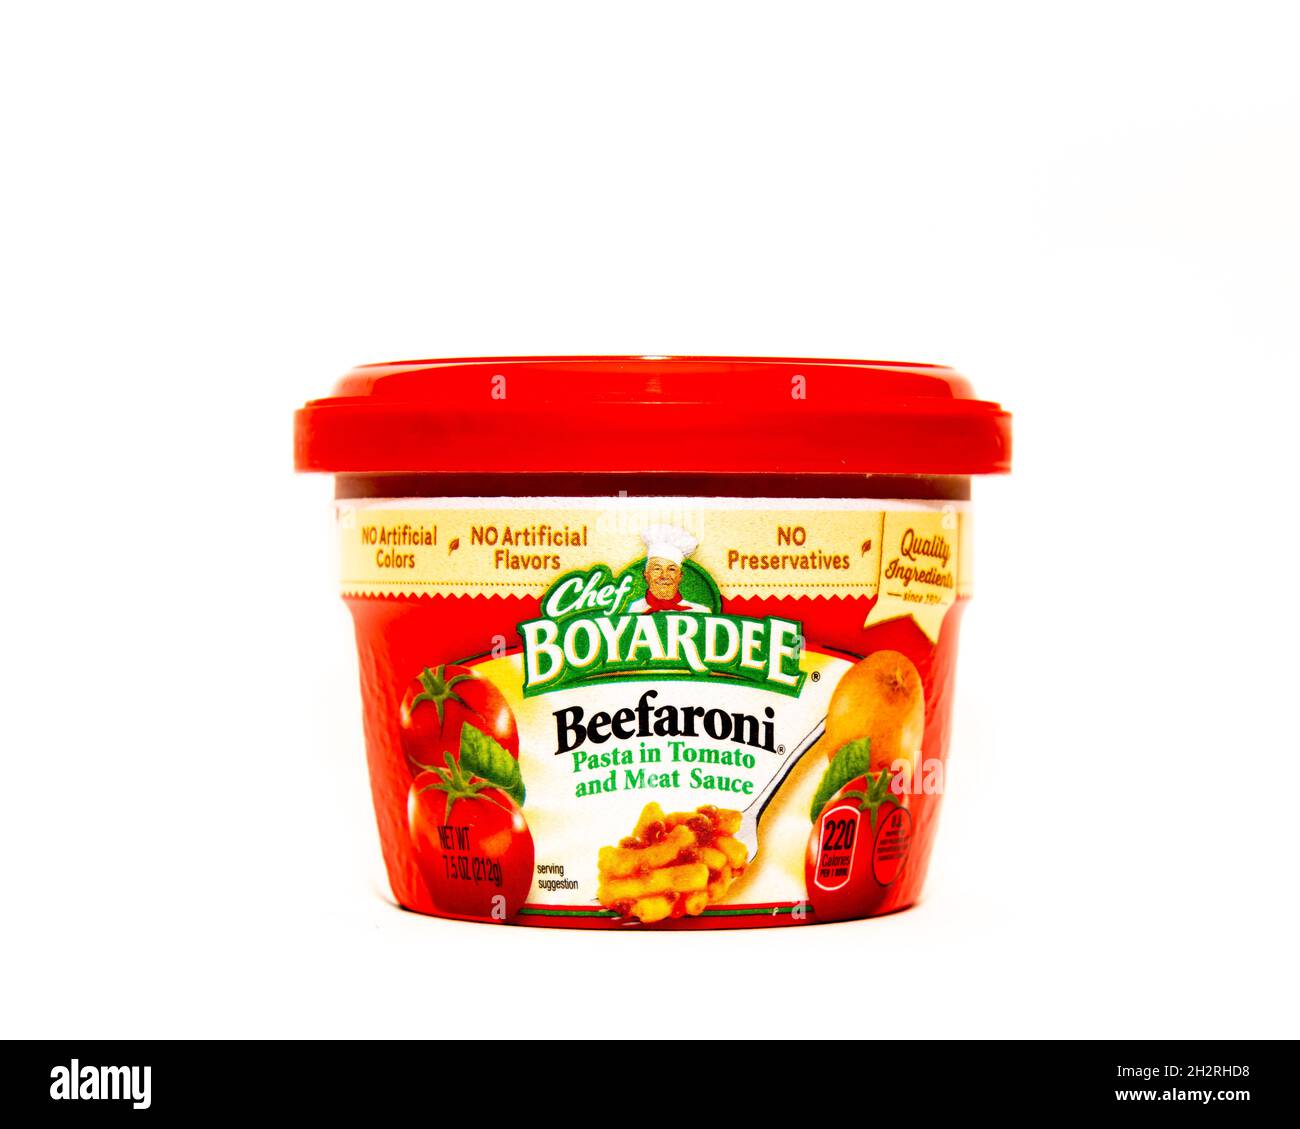 A container of Chef Boyardee Beefaroni Pasta in tomato and meat sauce, with no preservatives and no artificial colors, ready to heat in microwave. Stock Photo